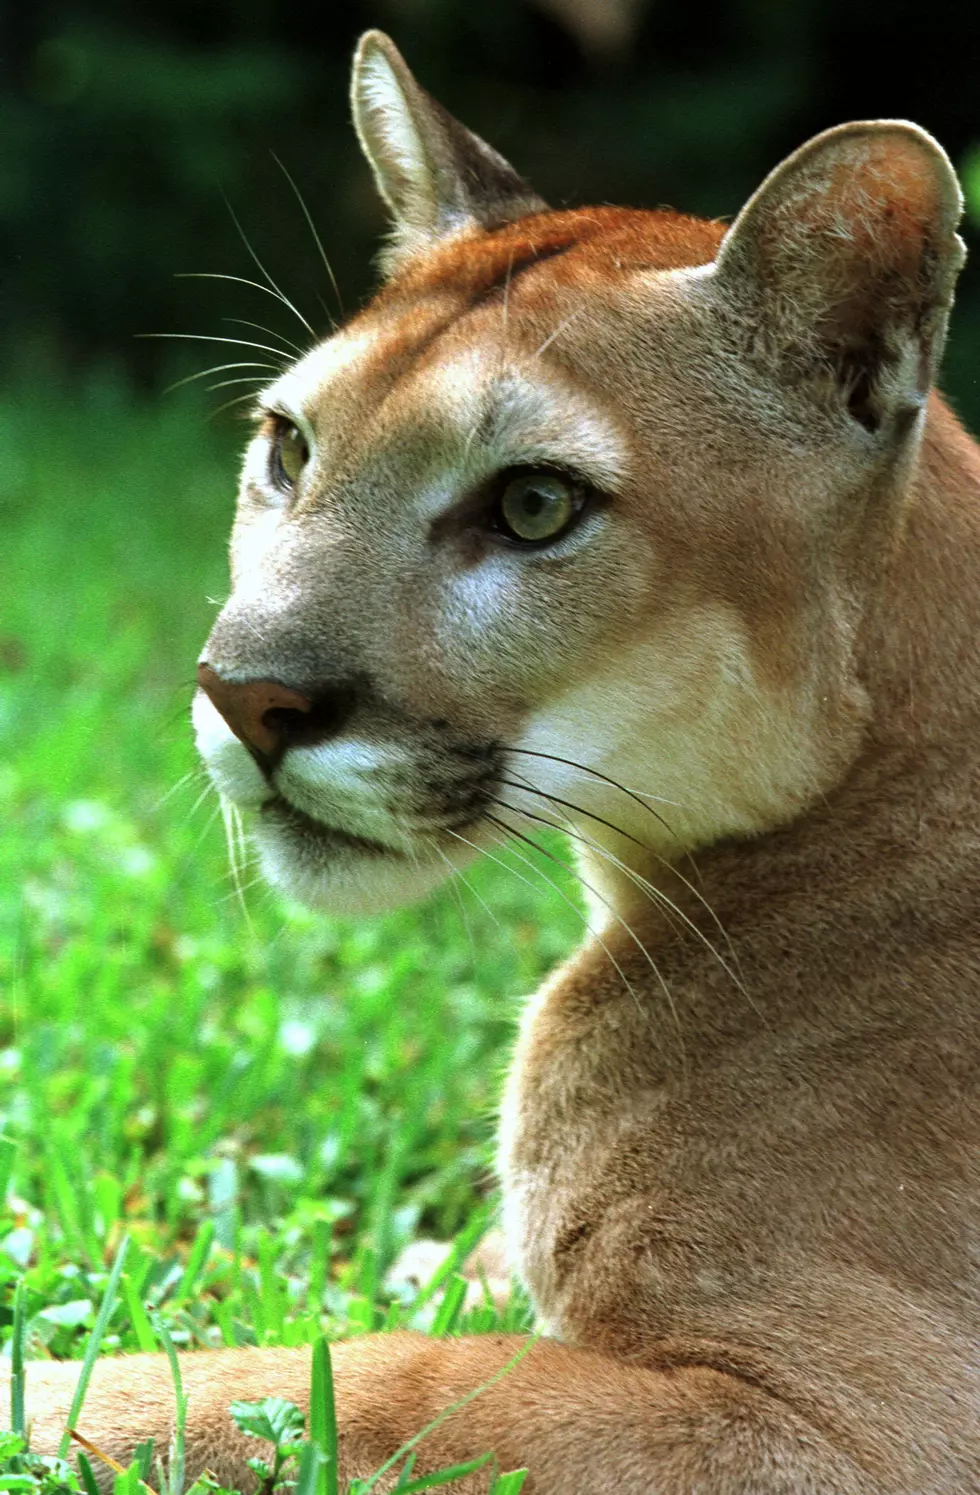 Mountain Lions are Not Social Distancing in Colorado Neighborhood